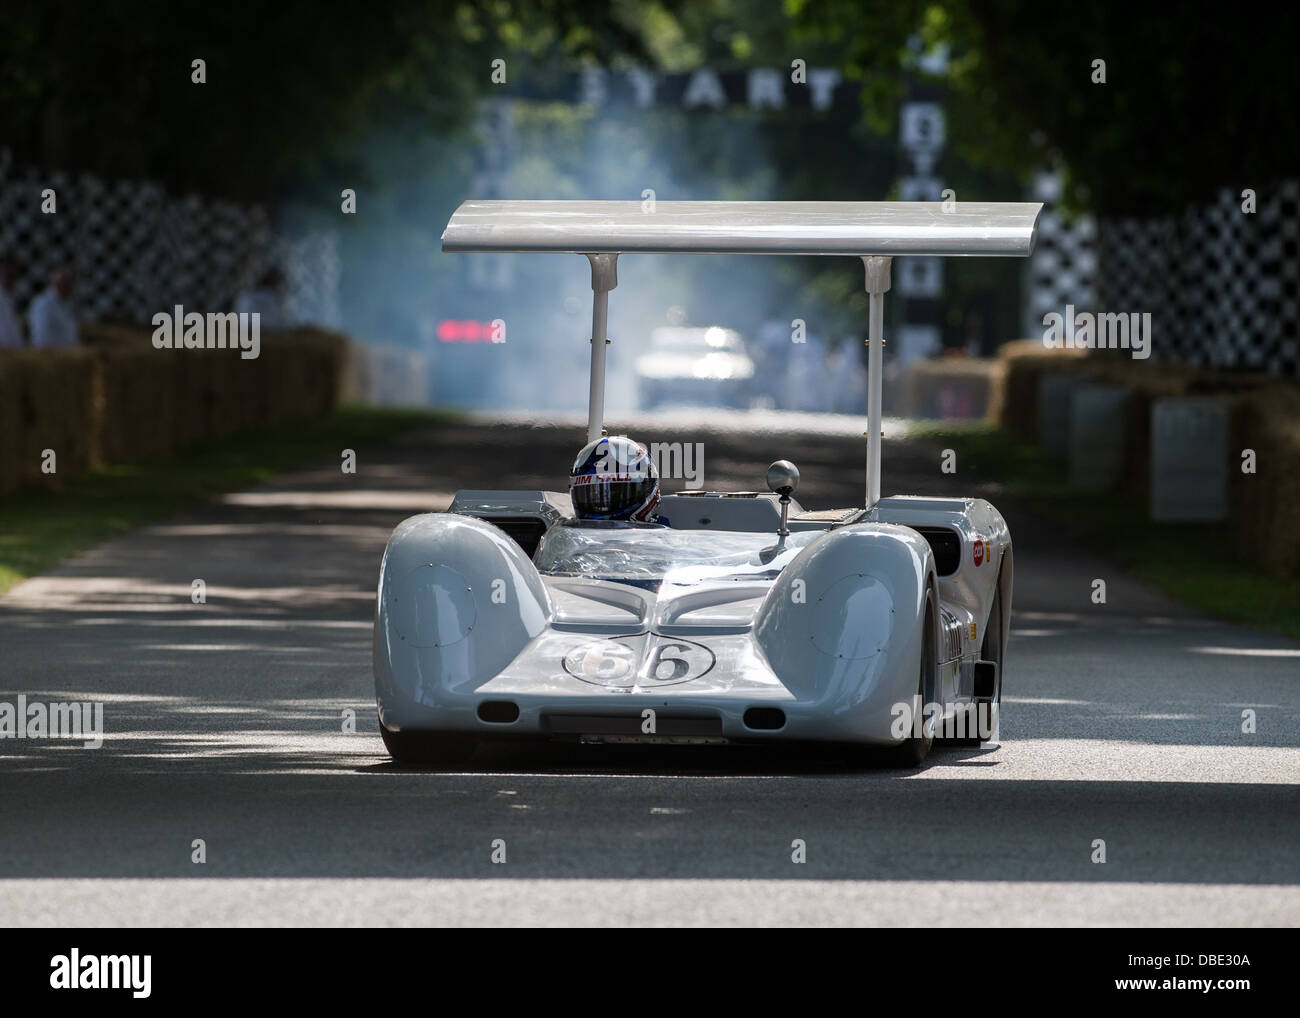 Chichester, UK - July 2013: Chaparral-Chevrolet 2E in action at the Goodwood Festival of Speed on July 13, 2013. Stock Photo